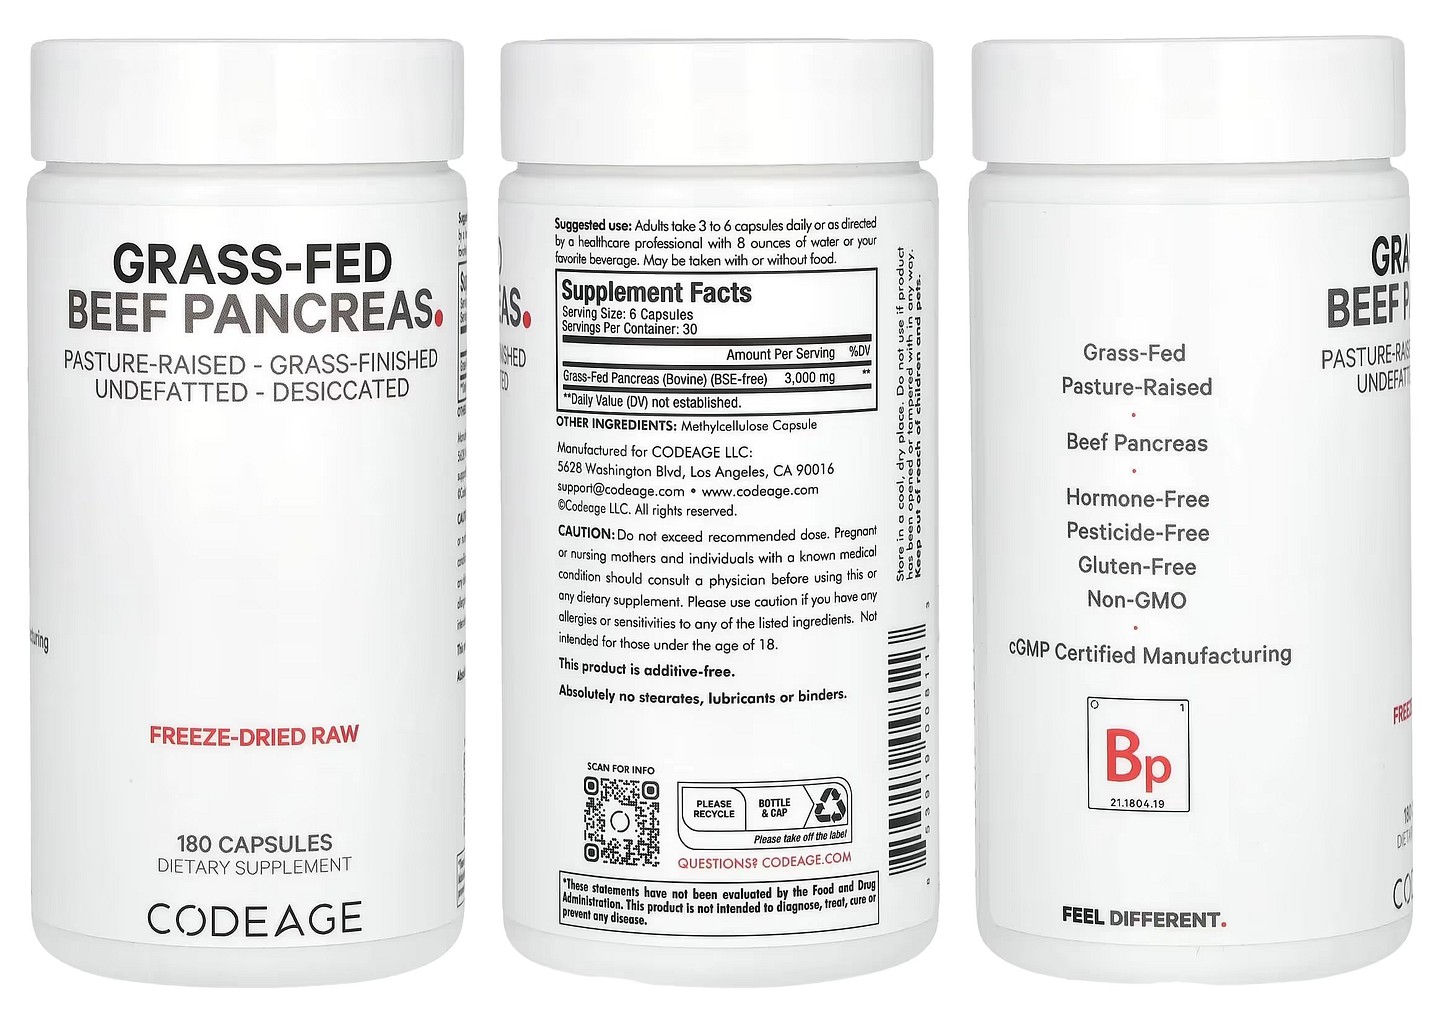 Codeage, Grass-Fed Beef Pancreas packaging